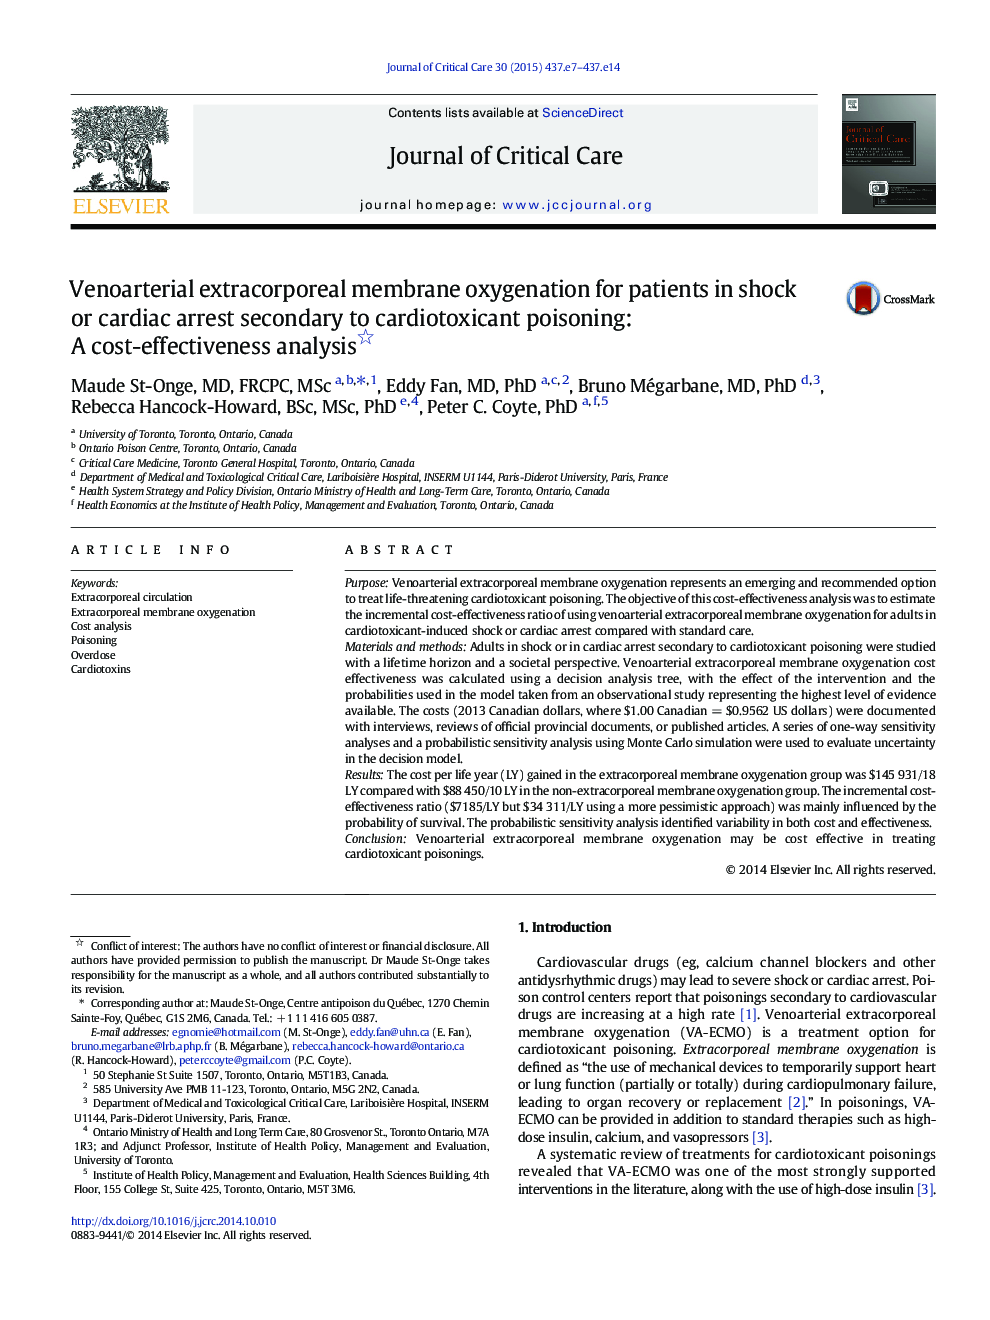 Venoarterial extracorporeal membrane oxygenation for patients in shock or cardiac arrest secondary to cardiotoxicant poisoning: A cost-effectiveness analysis